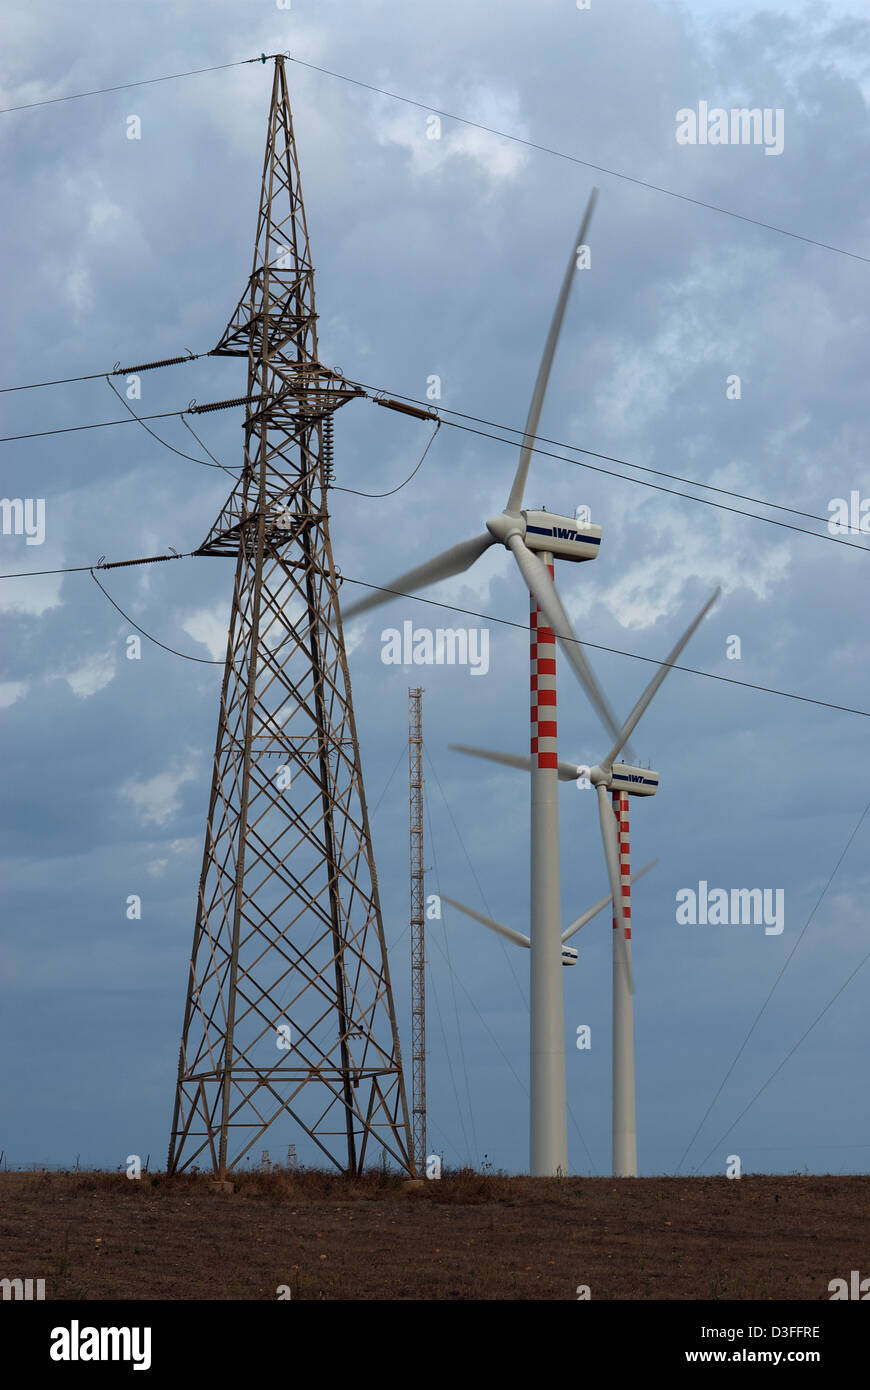 Porto Torres, Italy, wind power pole and wheels of the power utility Enel SpA Stock Photo